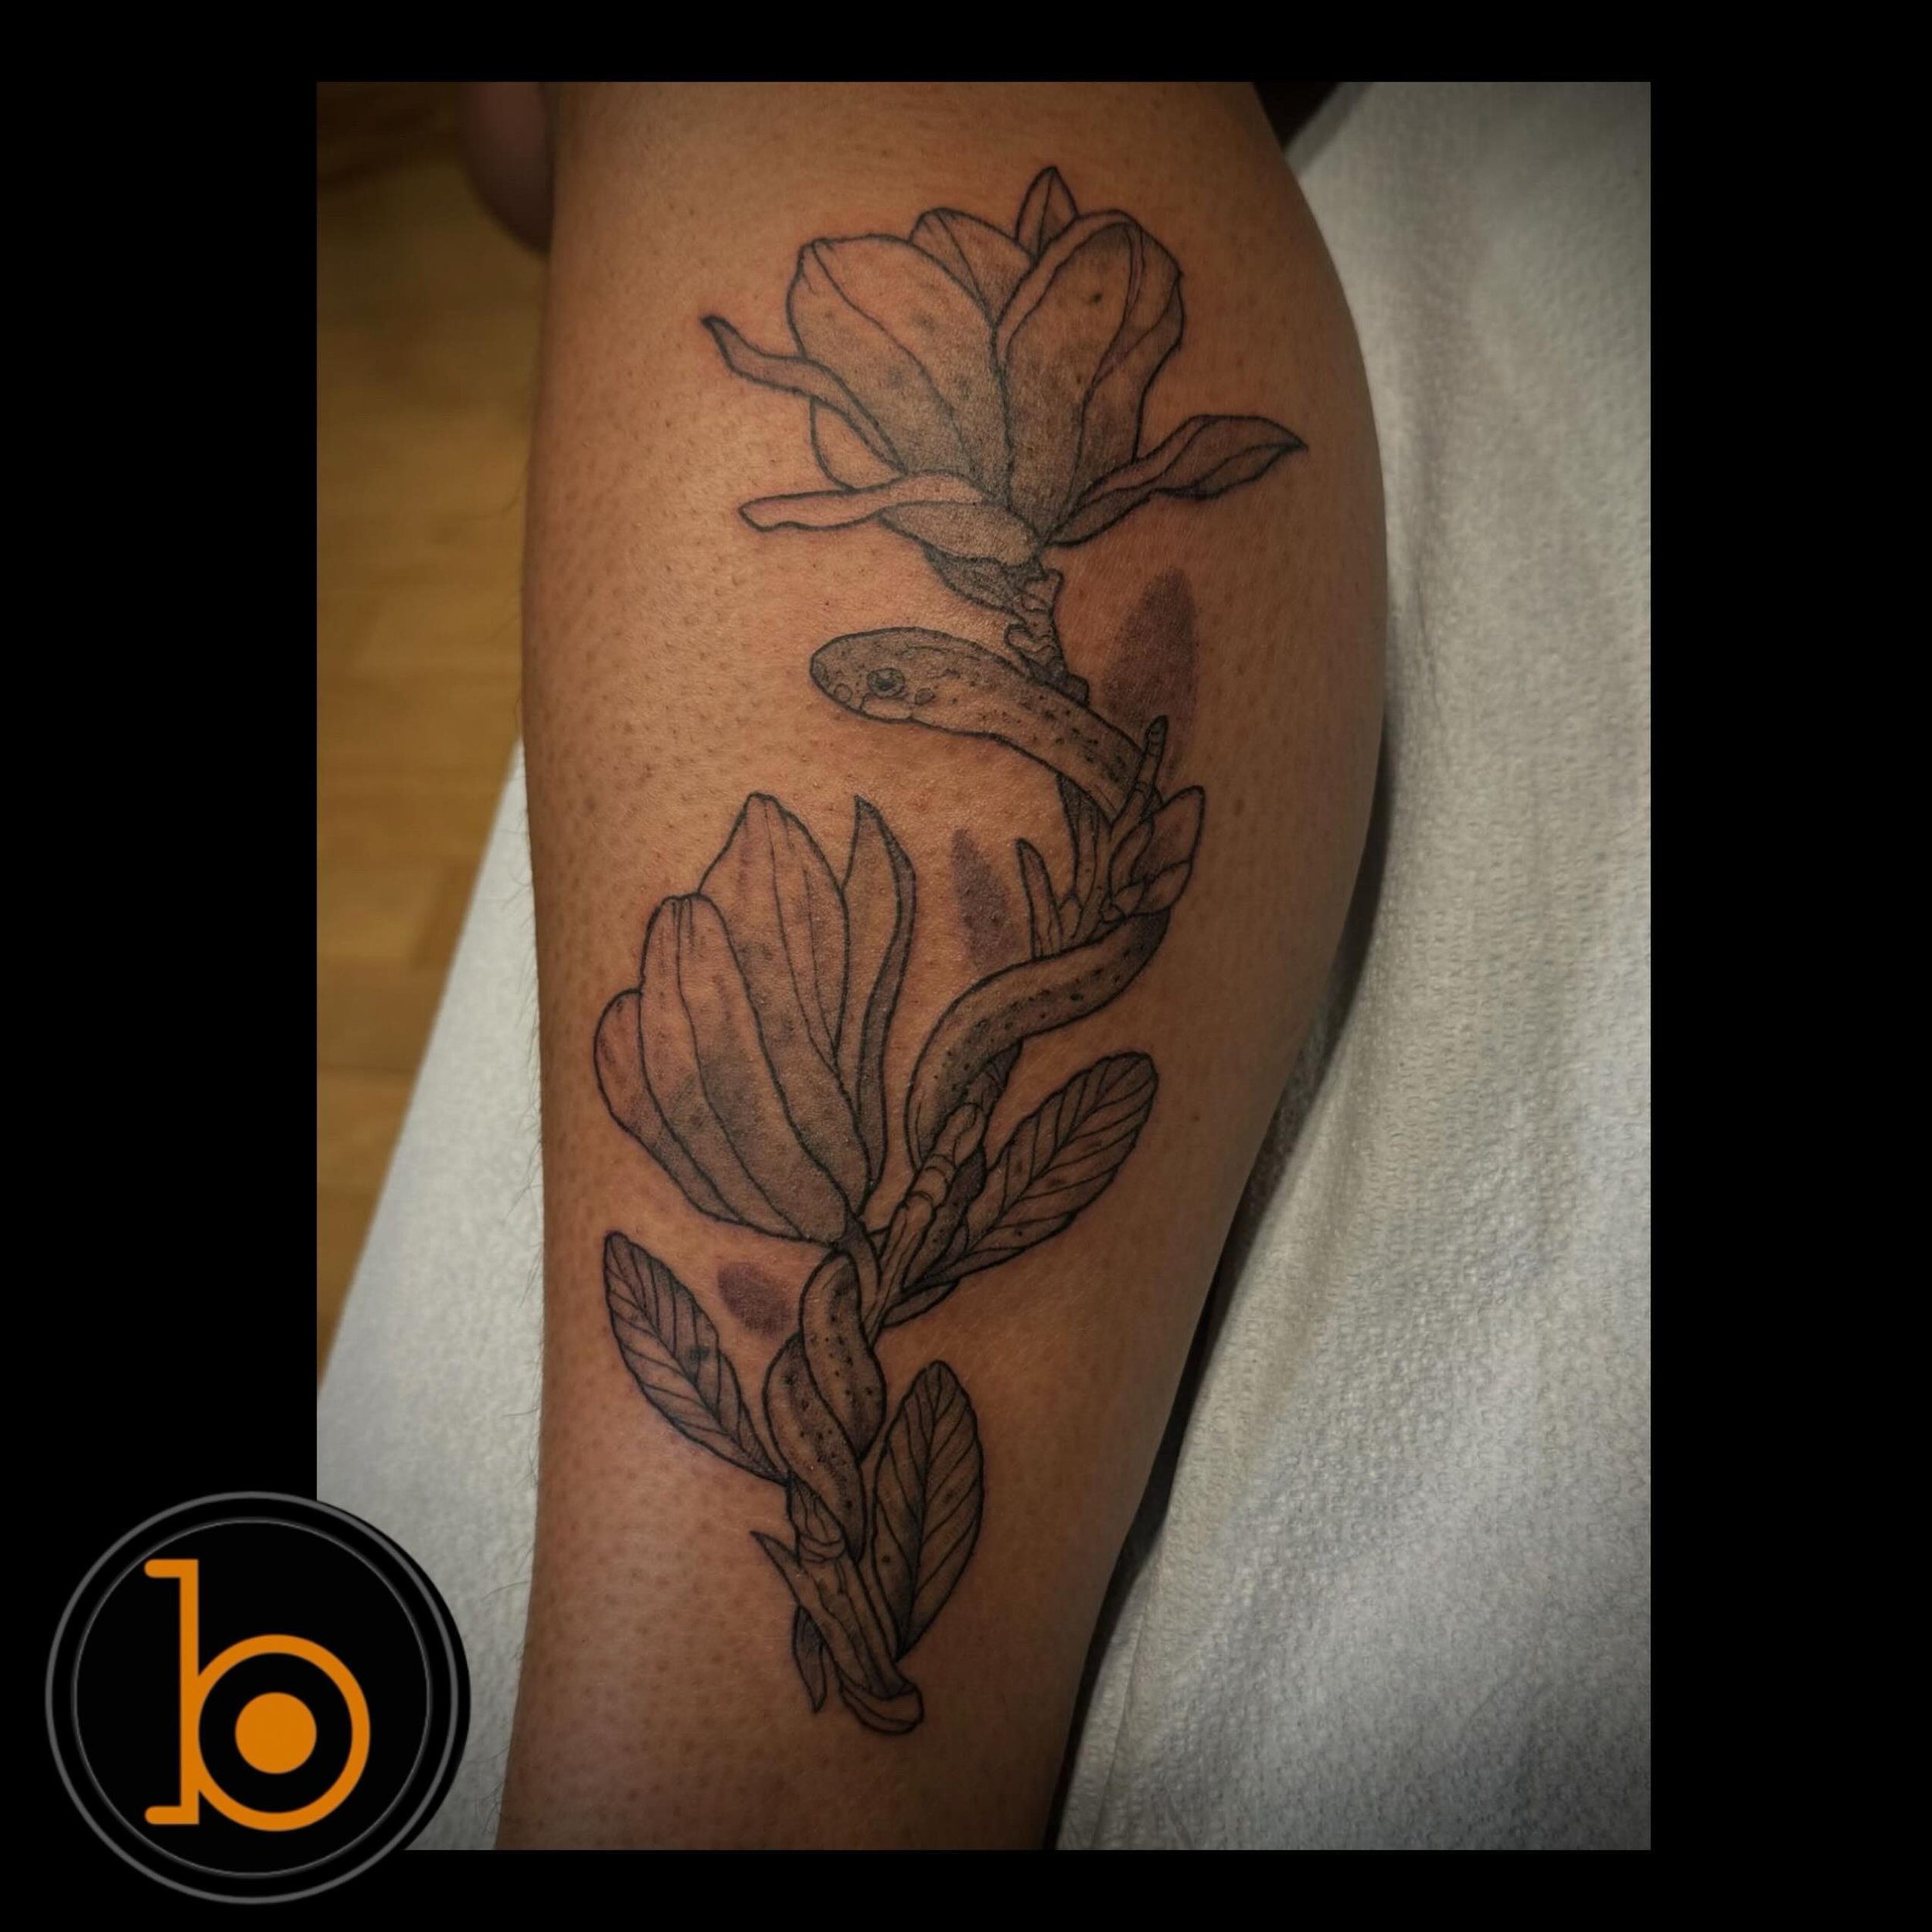 Floral and fauna by resident artist @rick.beaupre 🌸🐍
➖➖➖➖➖➖➖➖➖➖➖➖➖➖➖➖➖
Blueprint Gallery
138 Russell St
 Hadley MA 01035
📱(413)-387-0221 
WALK-INS WELCOME 
🕸️ www.blueprintgallery.com 🕸️
⬇️⬇️⬇️⬇️⬇️⬇️⬇️⬇️⬇️⬇️⬇️⬇️⬇️
Made using materials from:
🌈 @